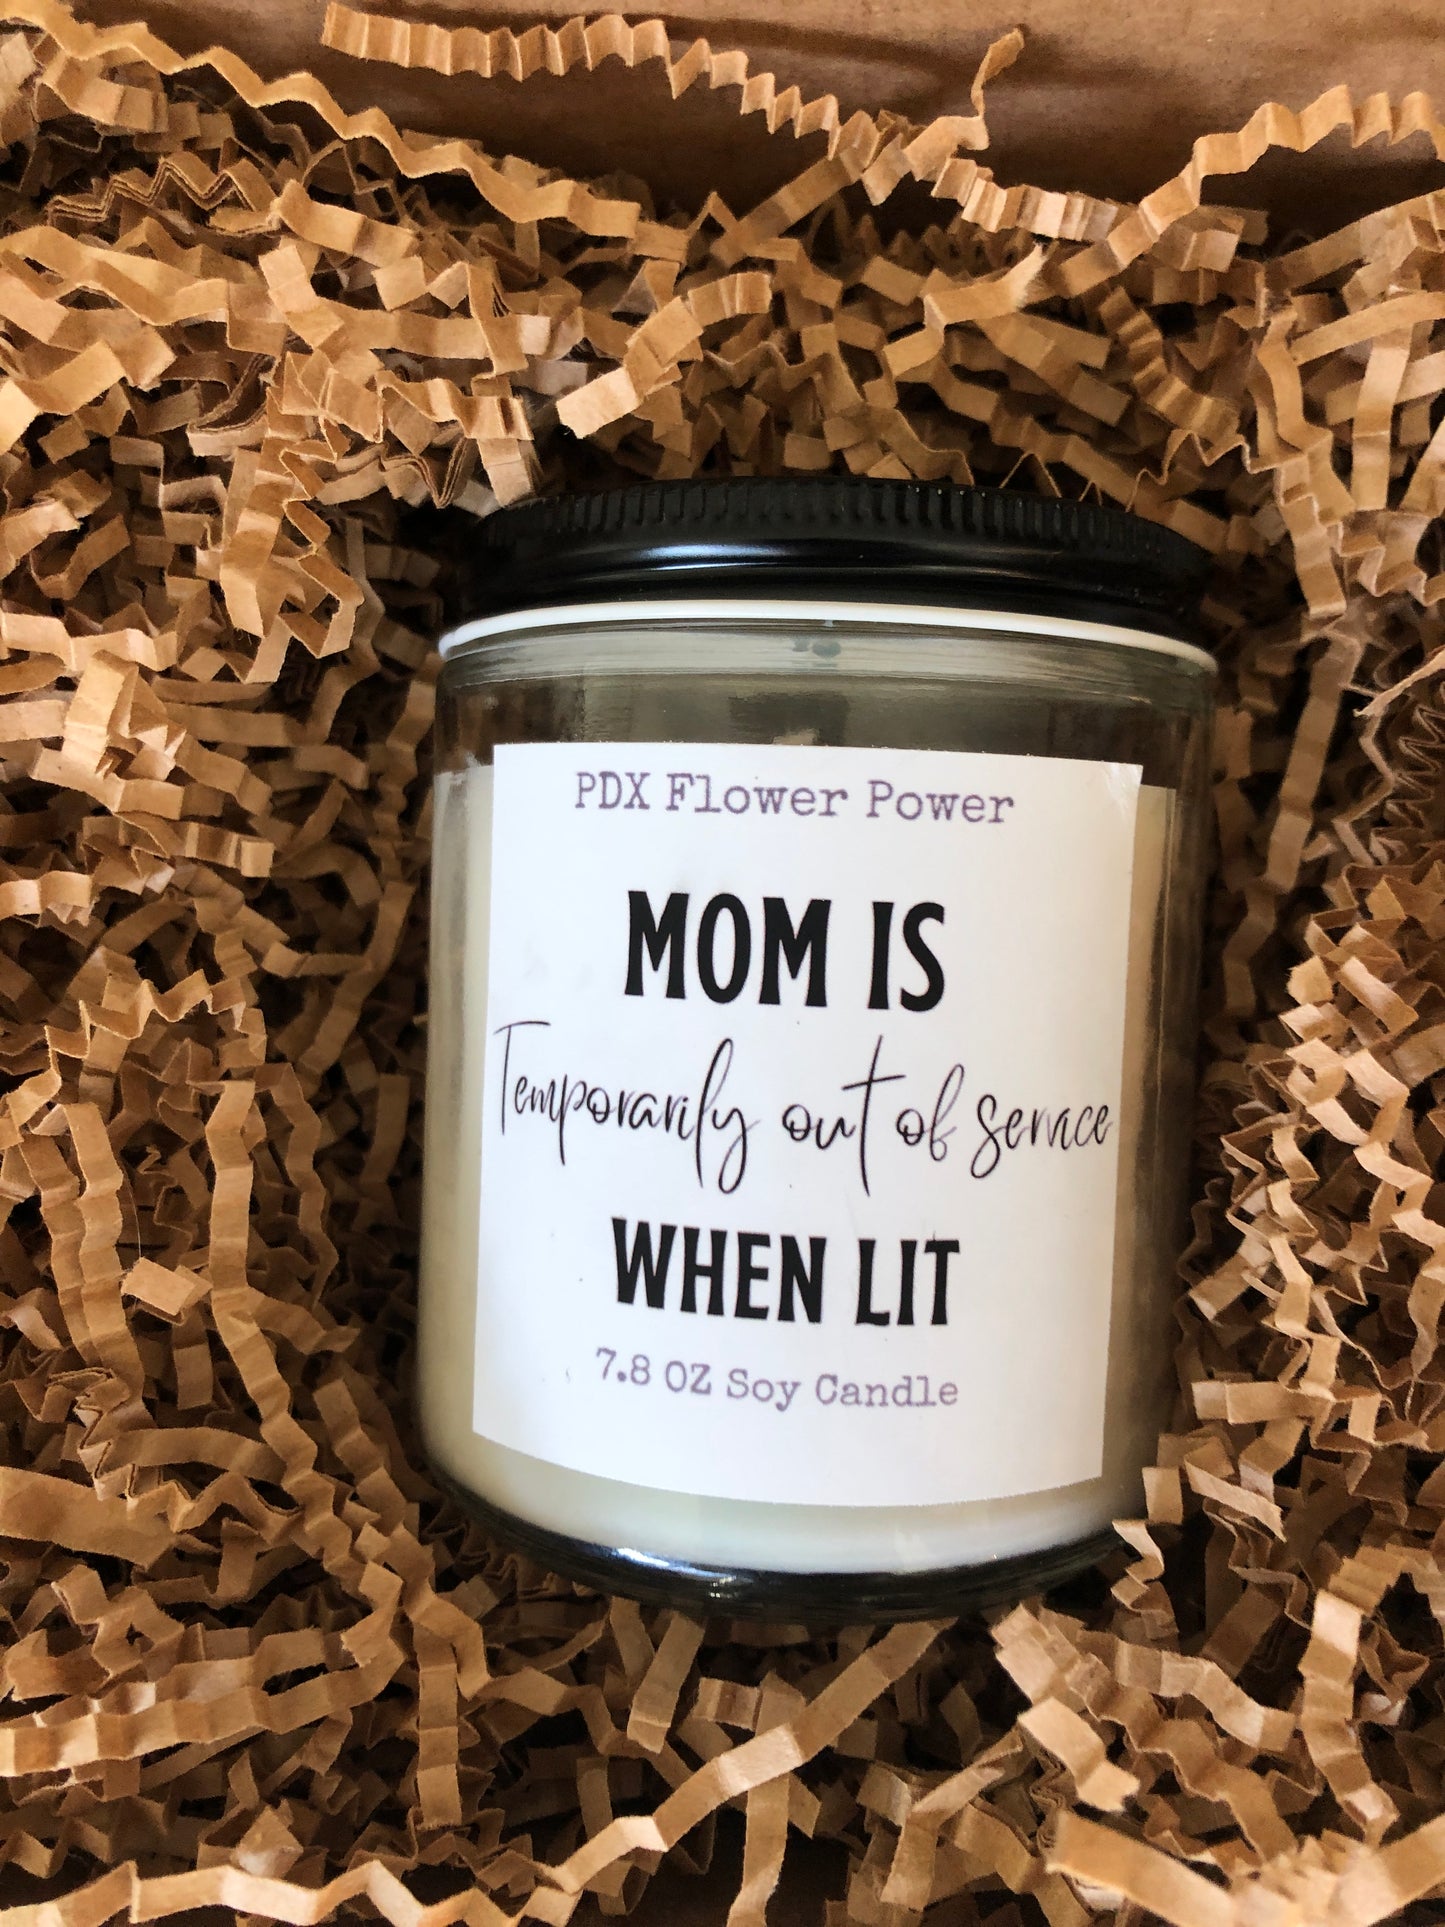 "Mom is temporarily out of service when lit" handcrafted soy candle